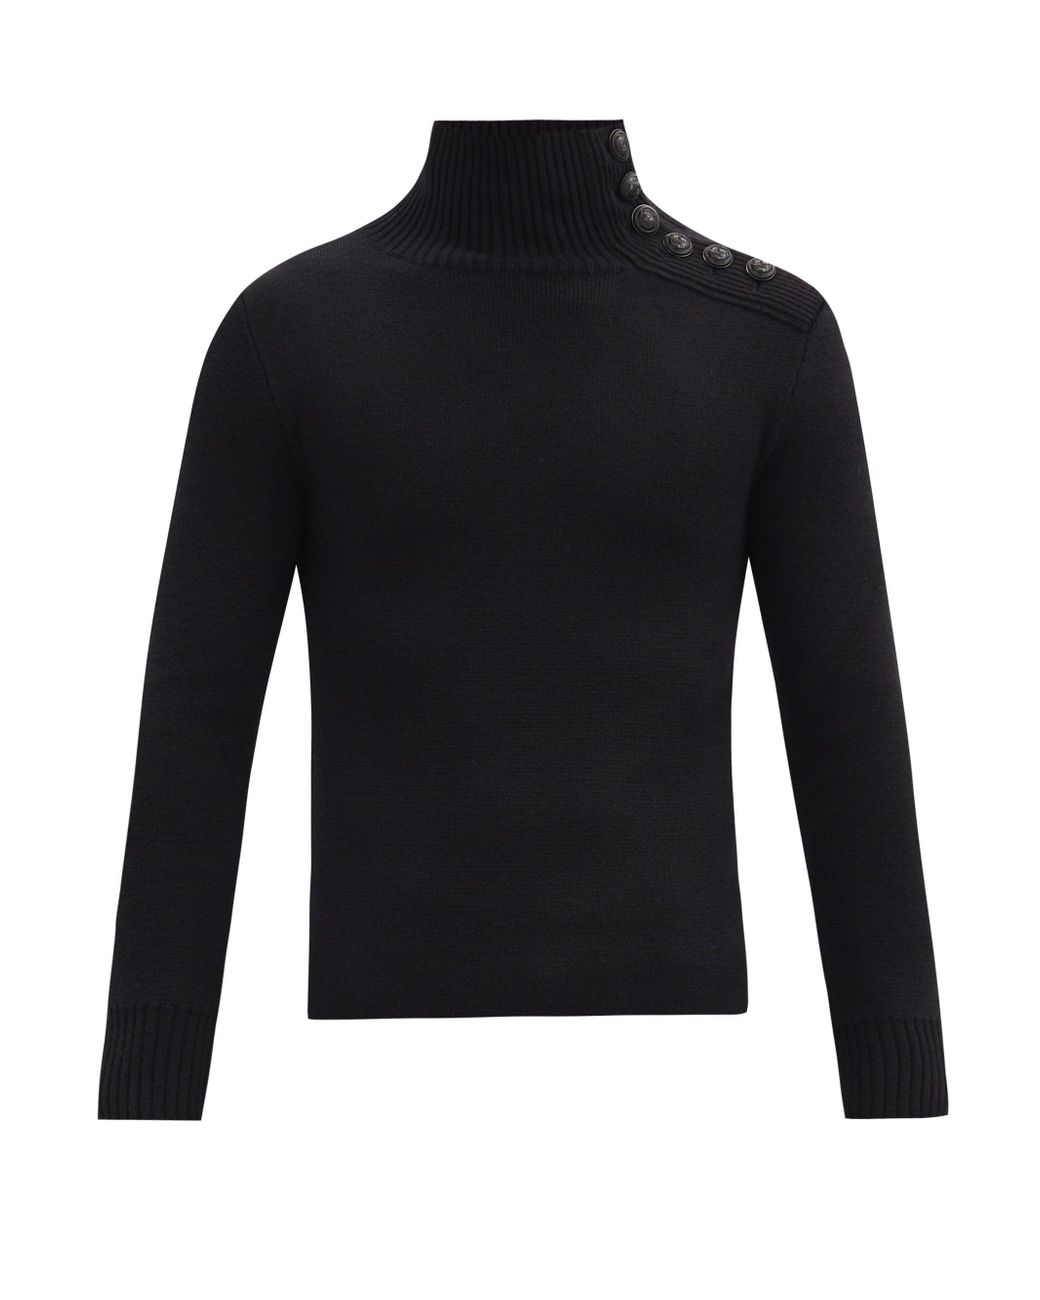 Paco Rabanne Buttoned High-neck Wool Sweater in Black for Men - Lyst